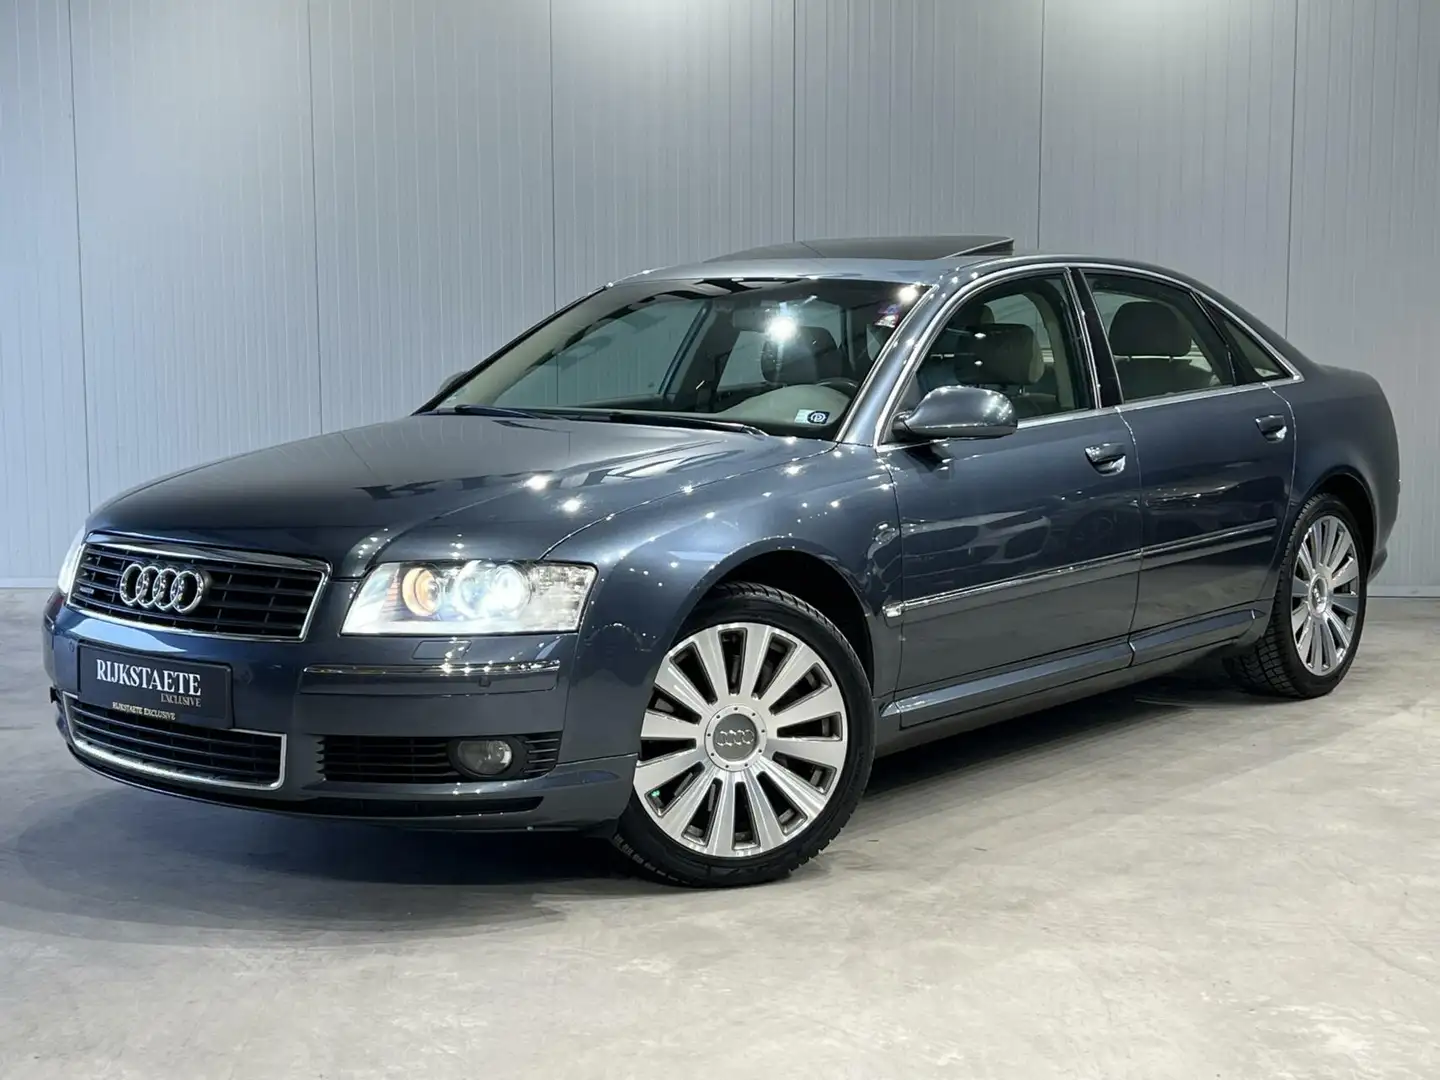 Audi A8 4.2 Quattro Pro Line|PANO|BOSE|YOUNGTIMER|LUCHTV. Blauw - 2